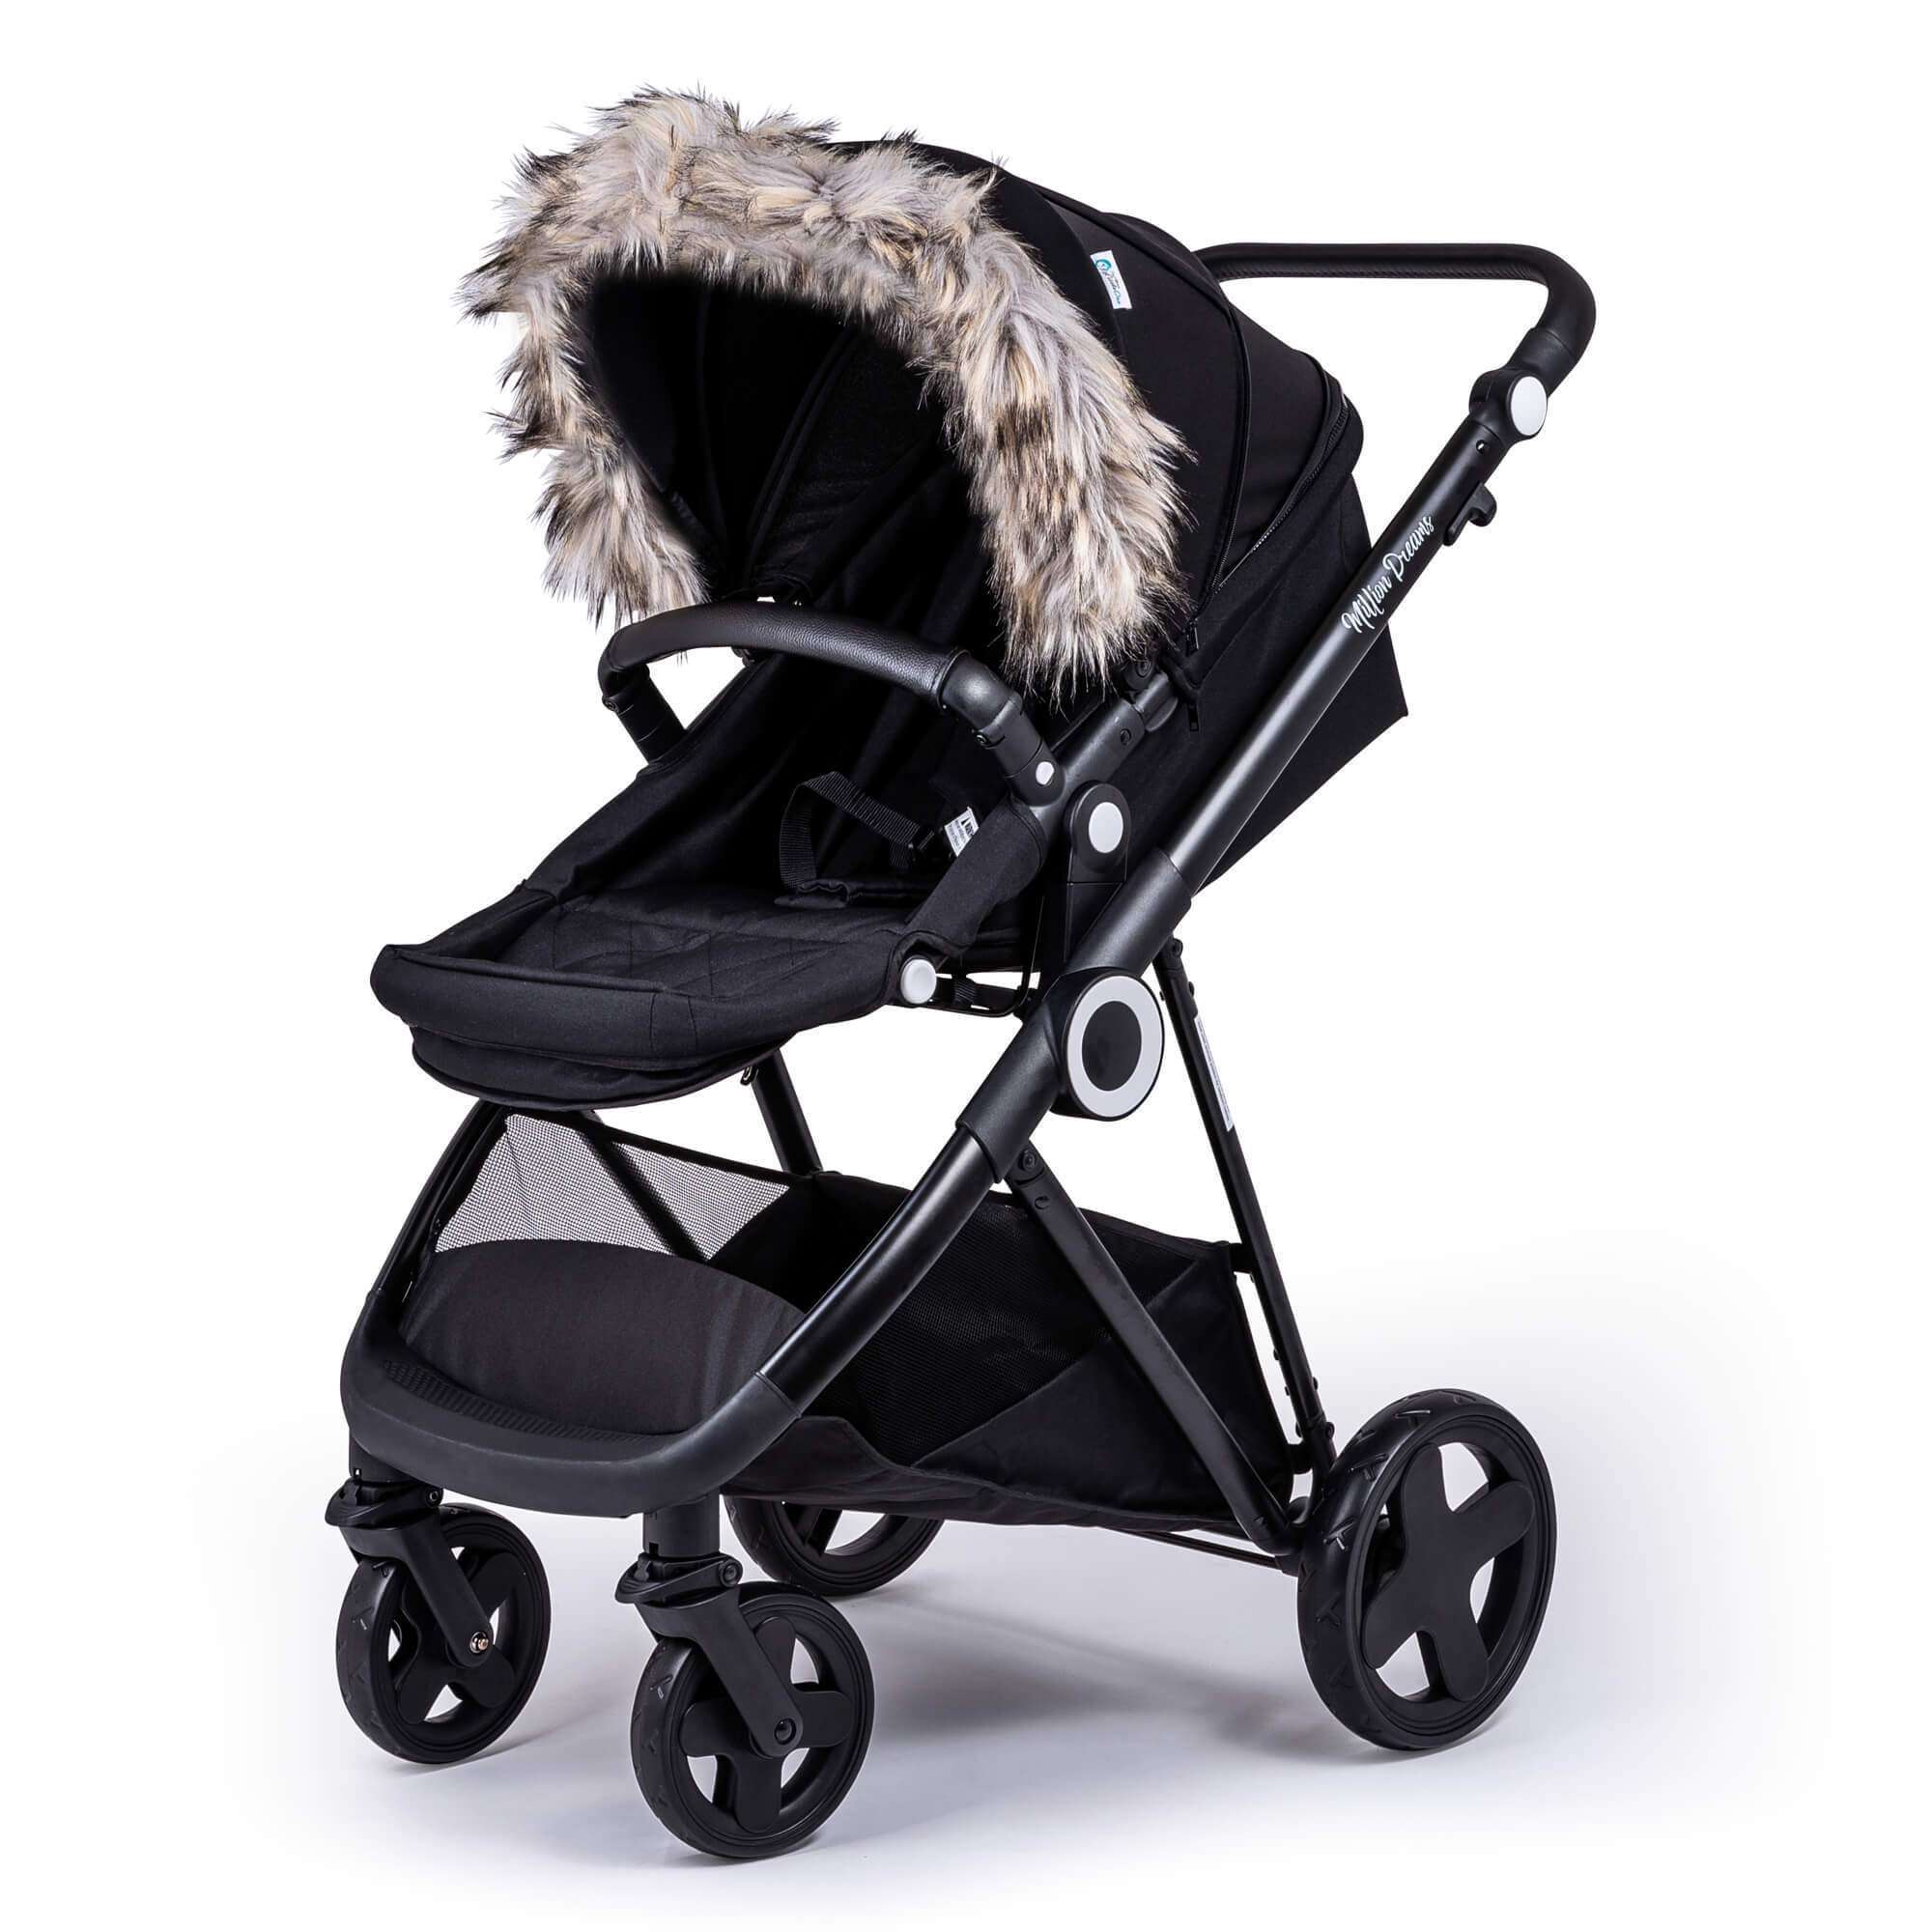 Pram Fur Hood Trim Attachment For Pushchair Compatible with Kids Kargo - Light Grey / Fits All Models | For Your Little One